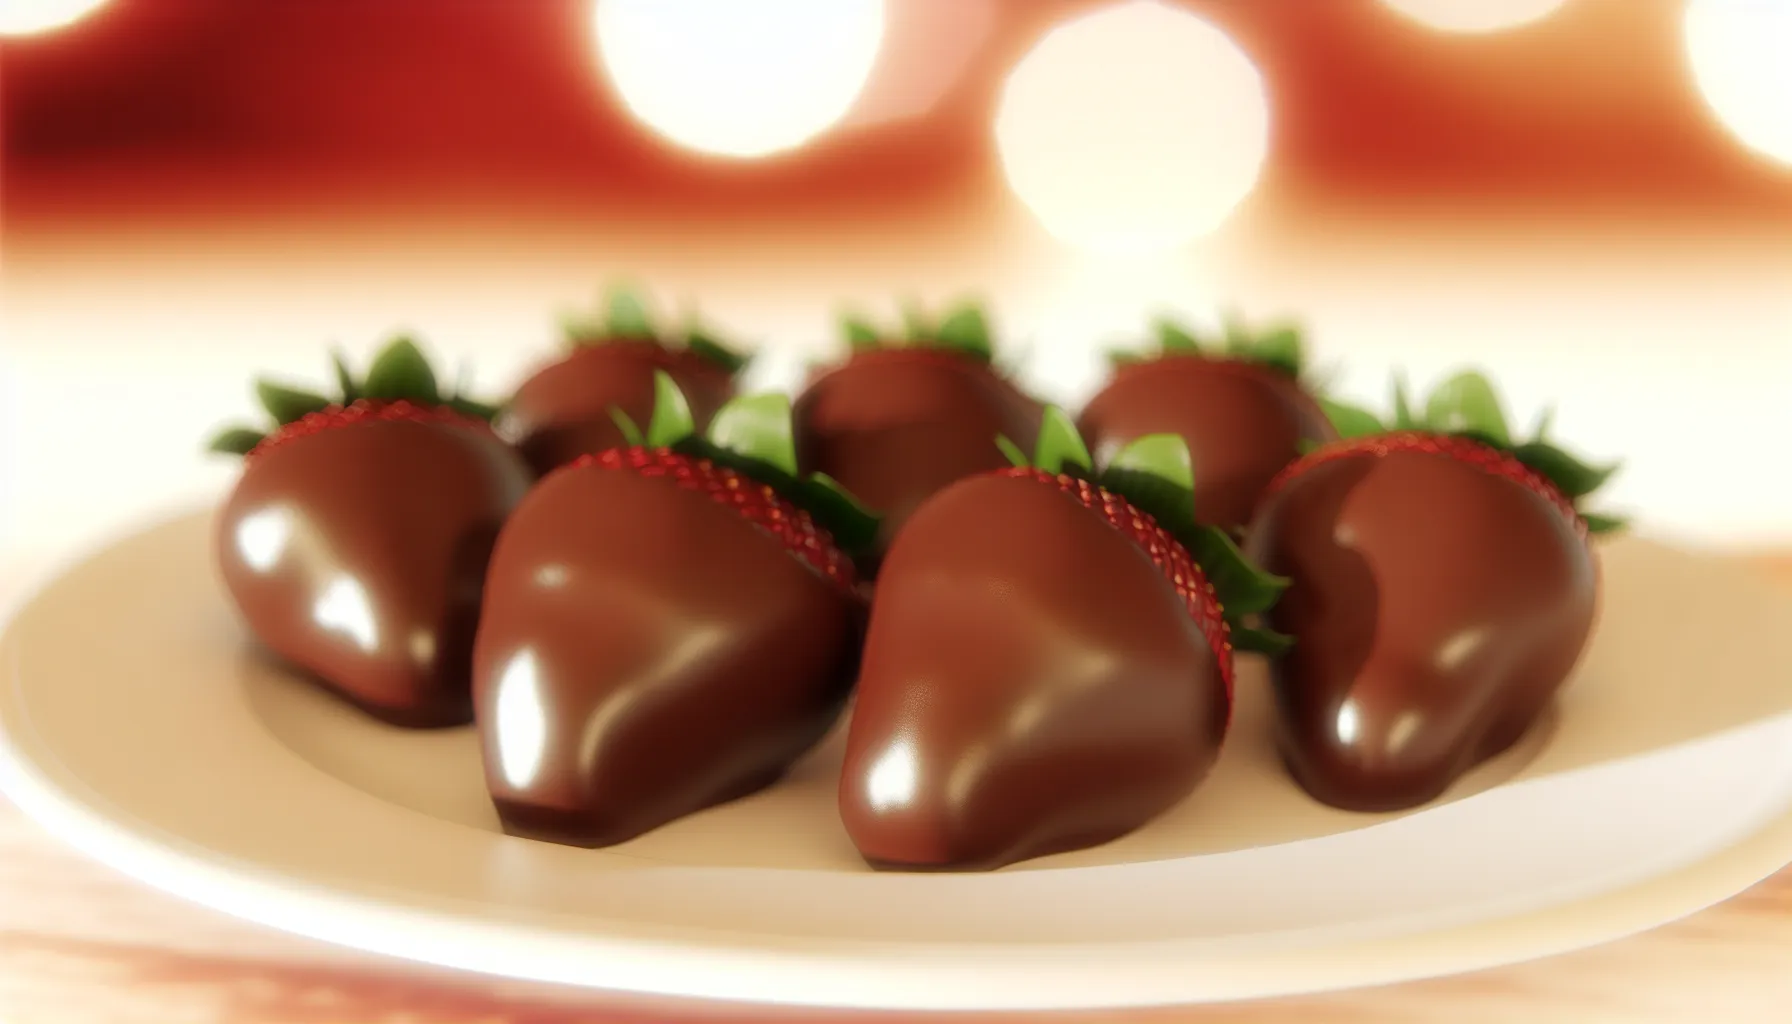 <strong>A Taste of Romance:</strong> Let these chocolate-draped berries, gleaming like jewels in the candle's glow, be the sweet echo of laughter and love shared throughout a meal to remember.